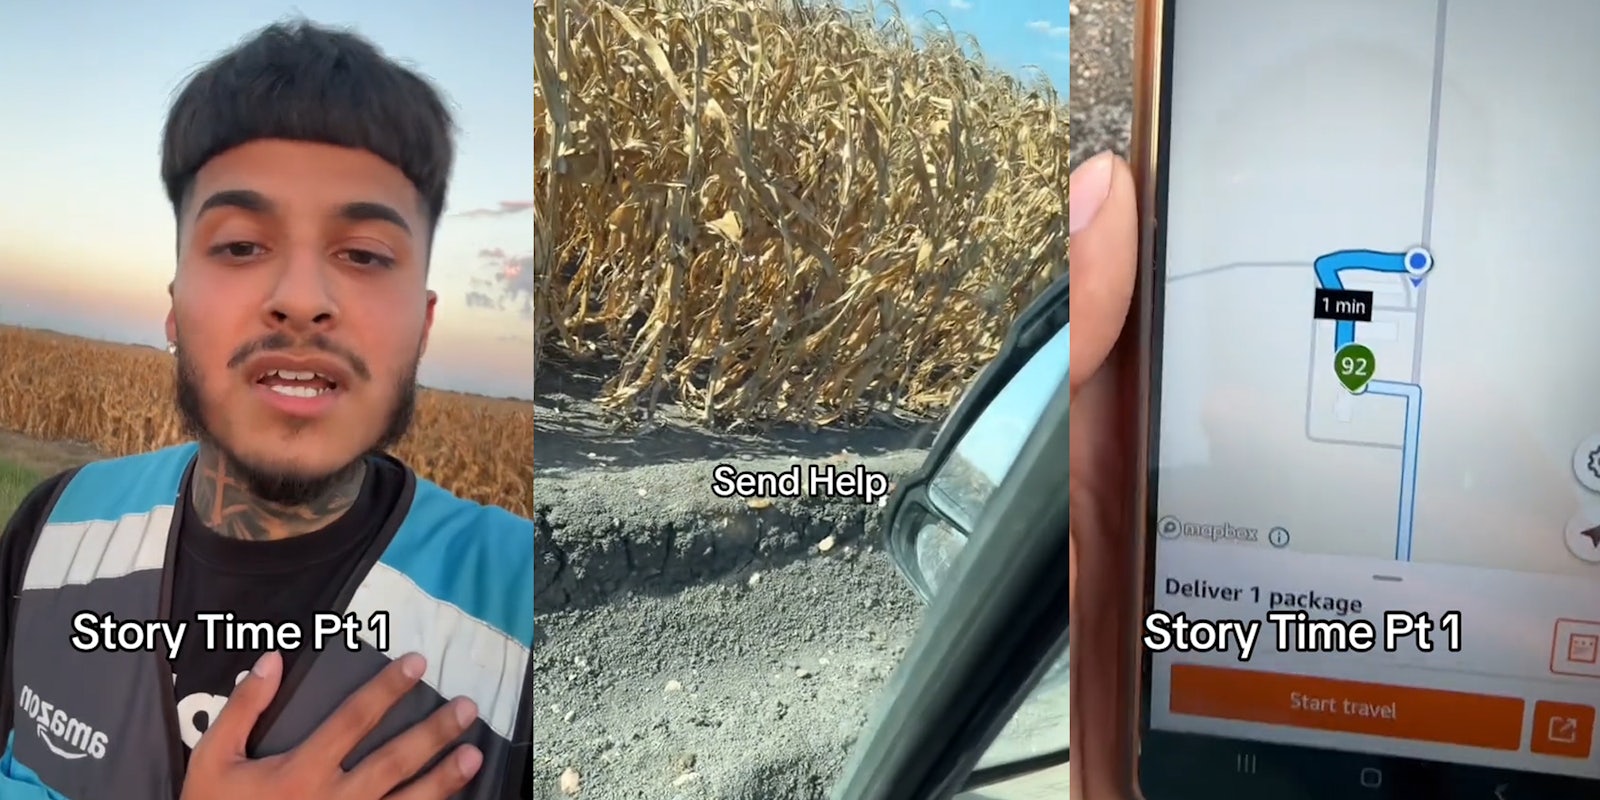 Amazon driver speaking in cornfield with caption 'Story Time Pt 1' (l) Amazon driver in van stuck in mud in cornfield with caption 'Send Help' (c) Amazon driver holding phone showing GPS route with caption 'Story Time Pt 1' (r)